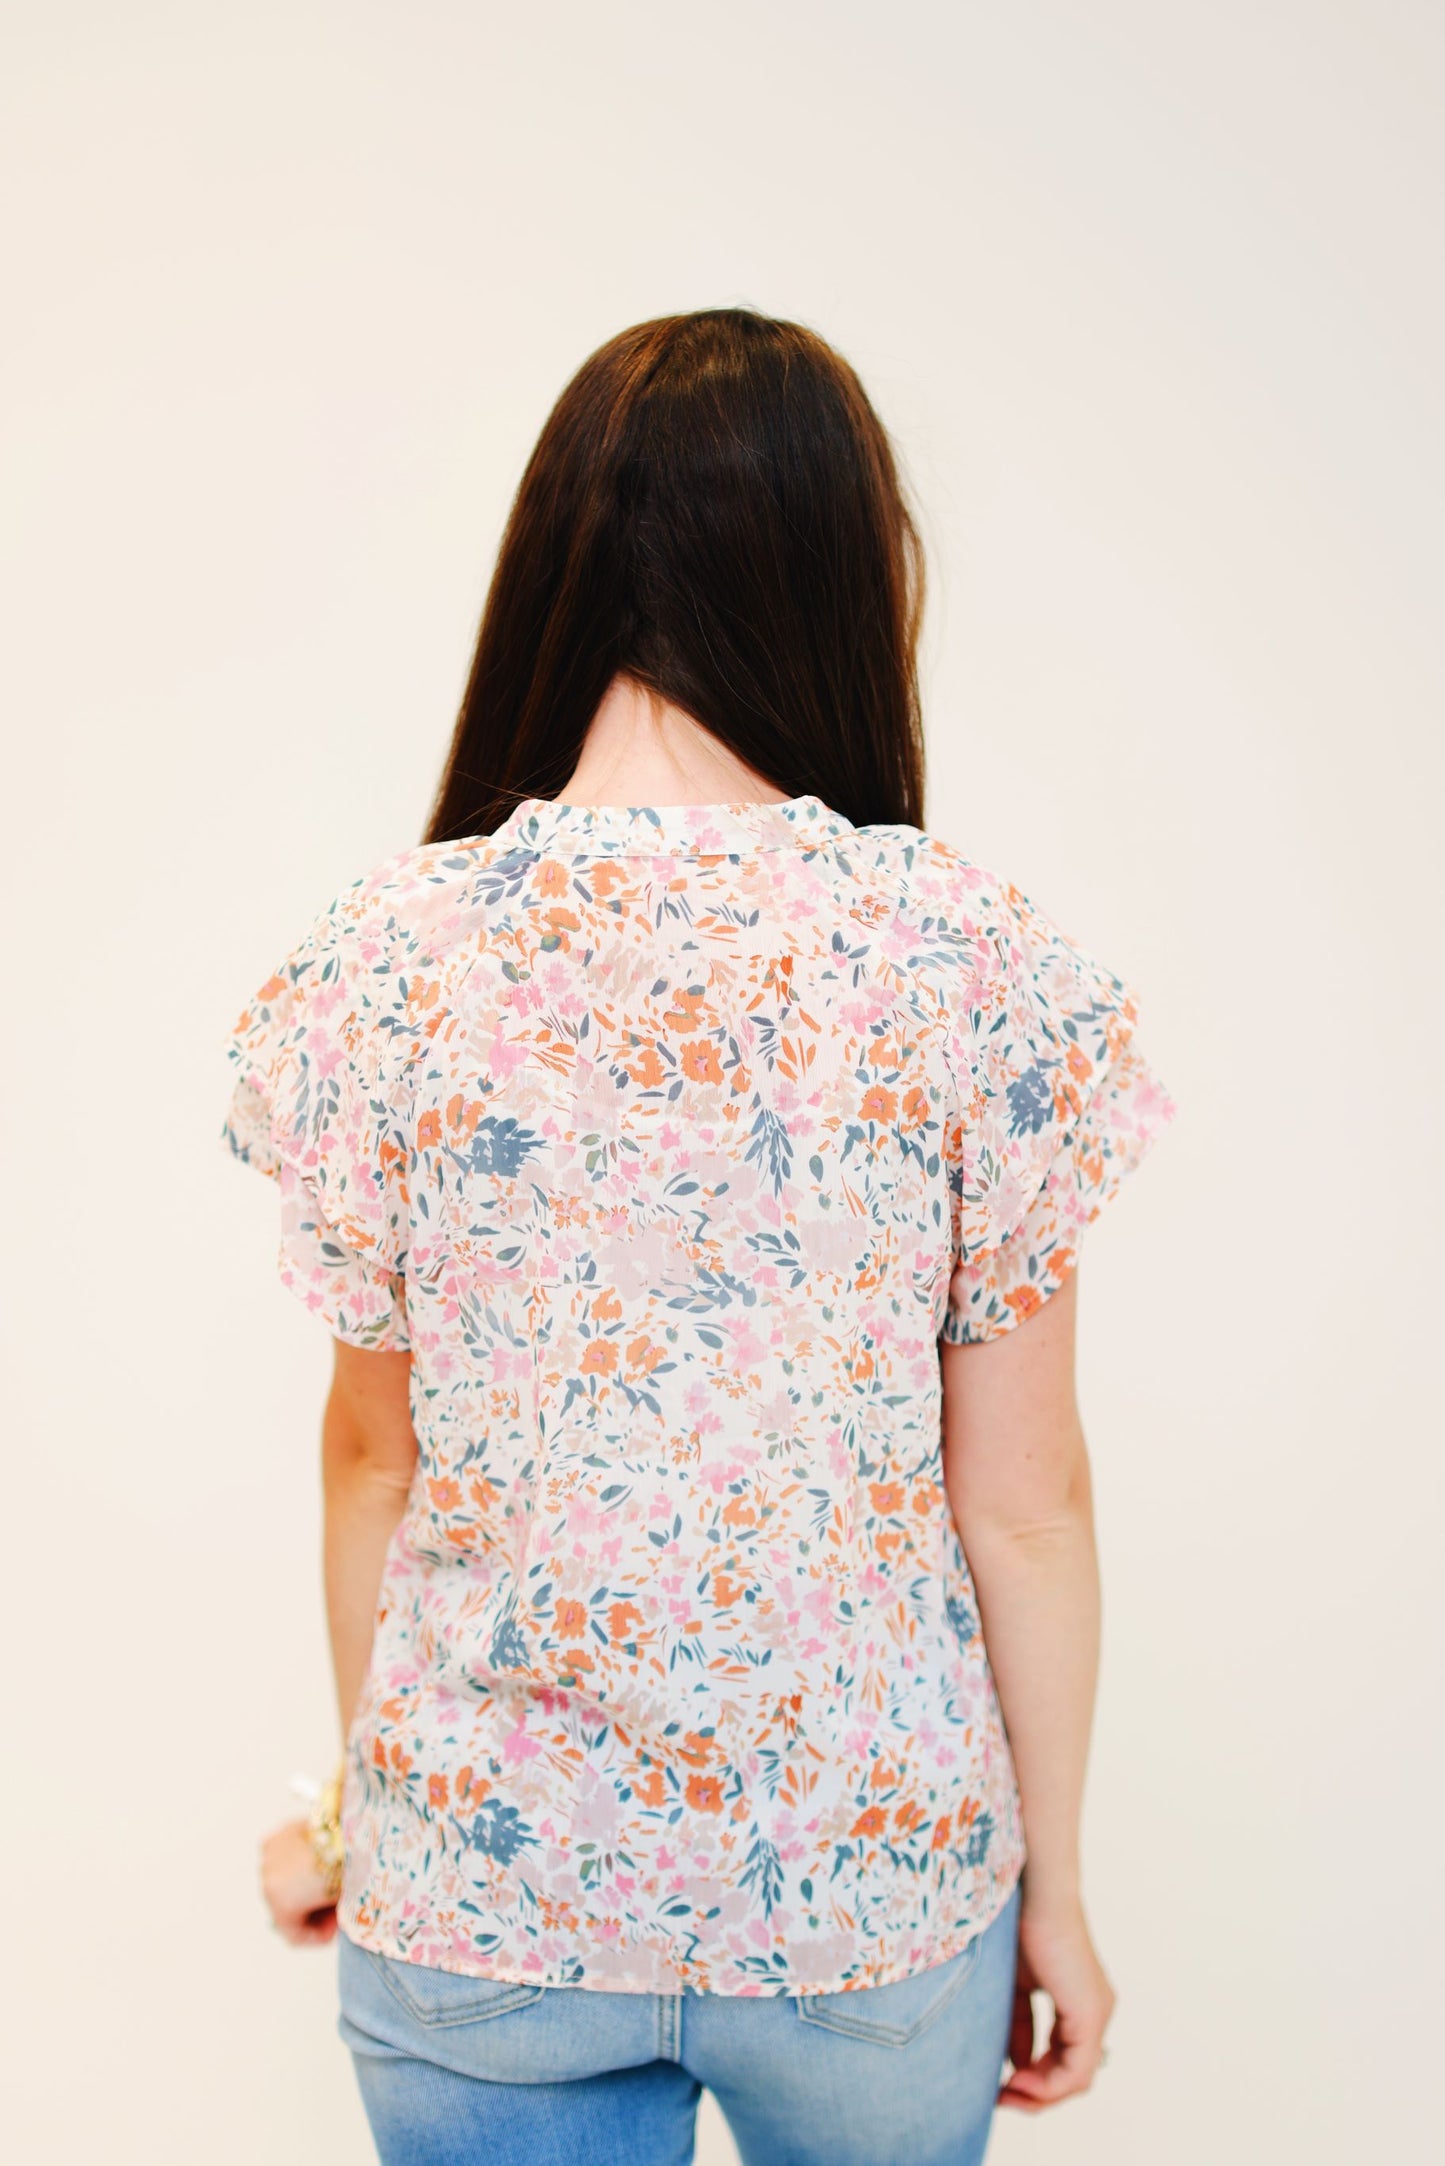 Falling in Ease Floral Blouse (S-XL)